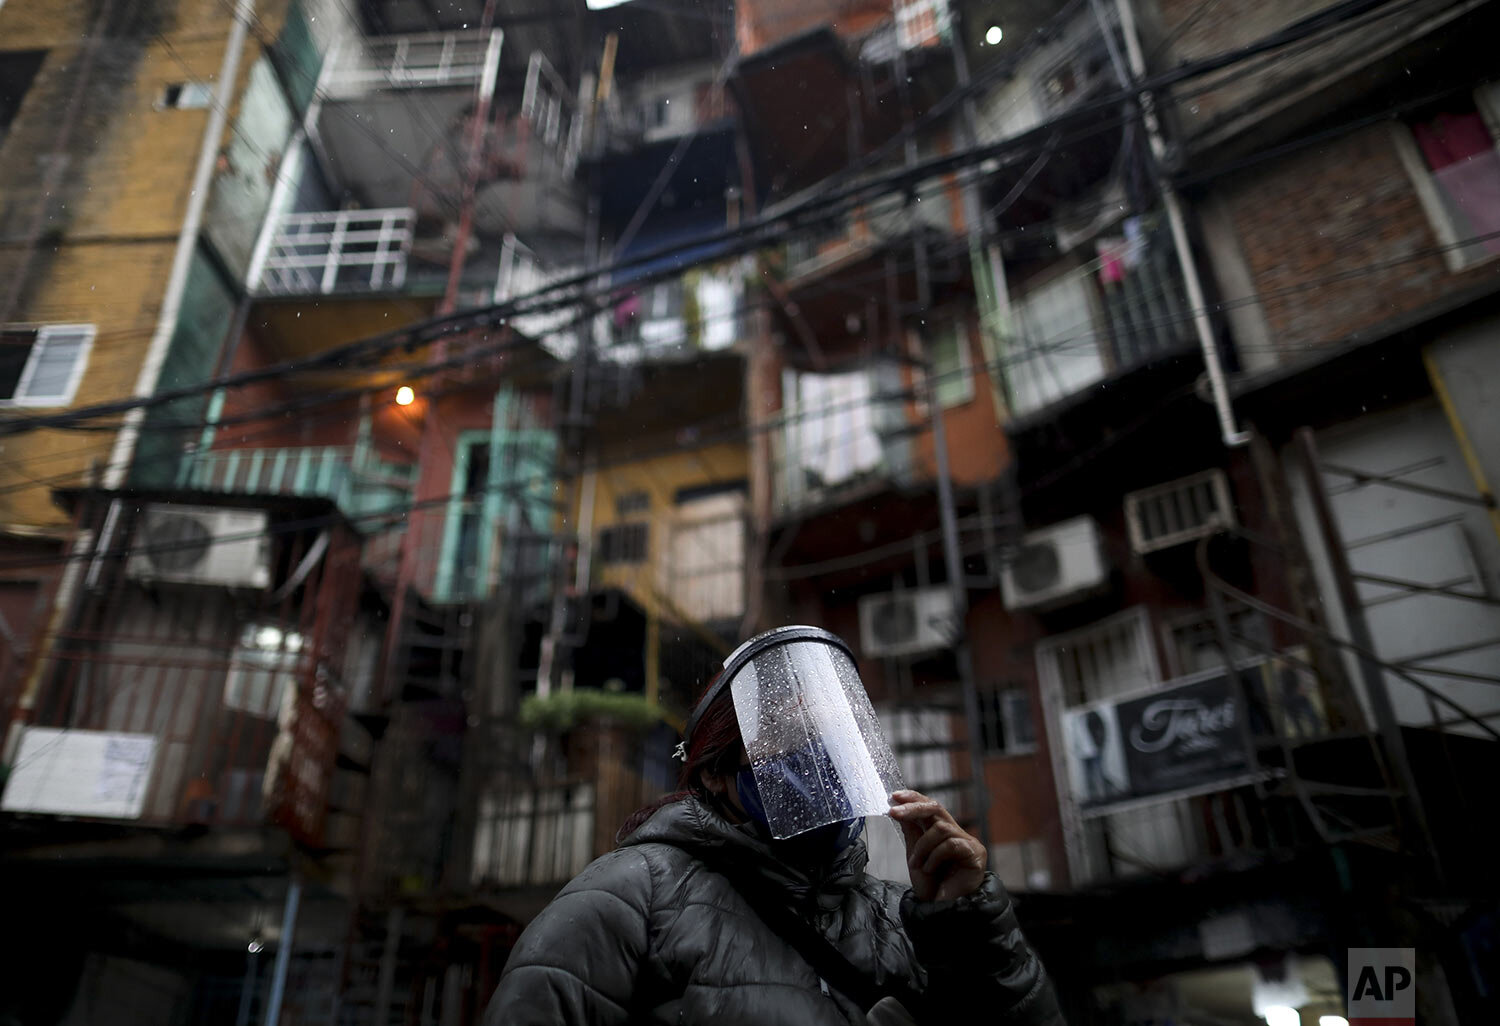  A woman wears a face shield in “Villa 31” in Buenos Aires, Argentina, Monday, May 4, 2020. (AP Photo/Natacha Pisarenko) 